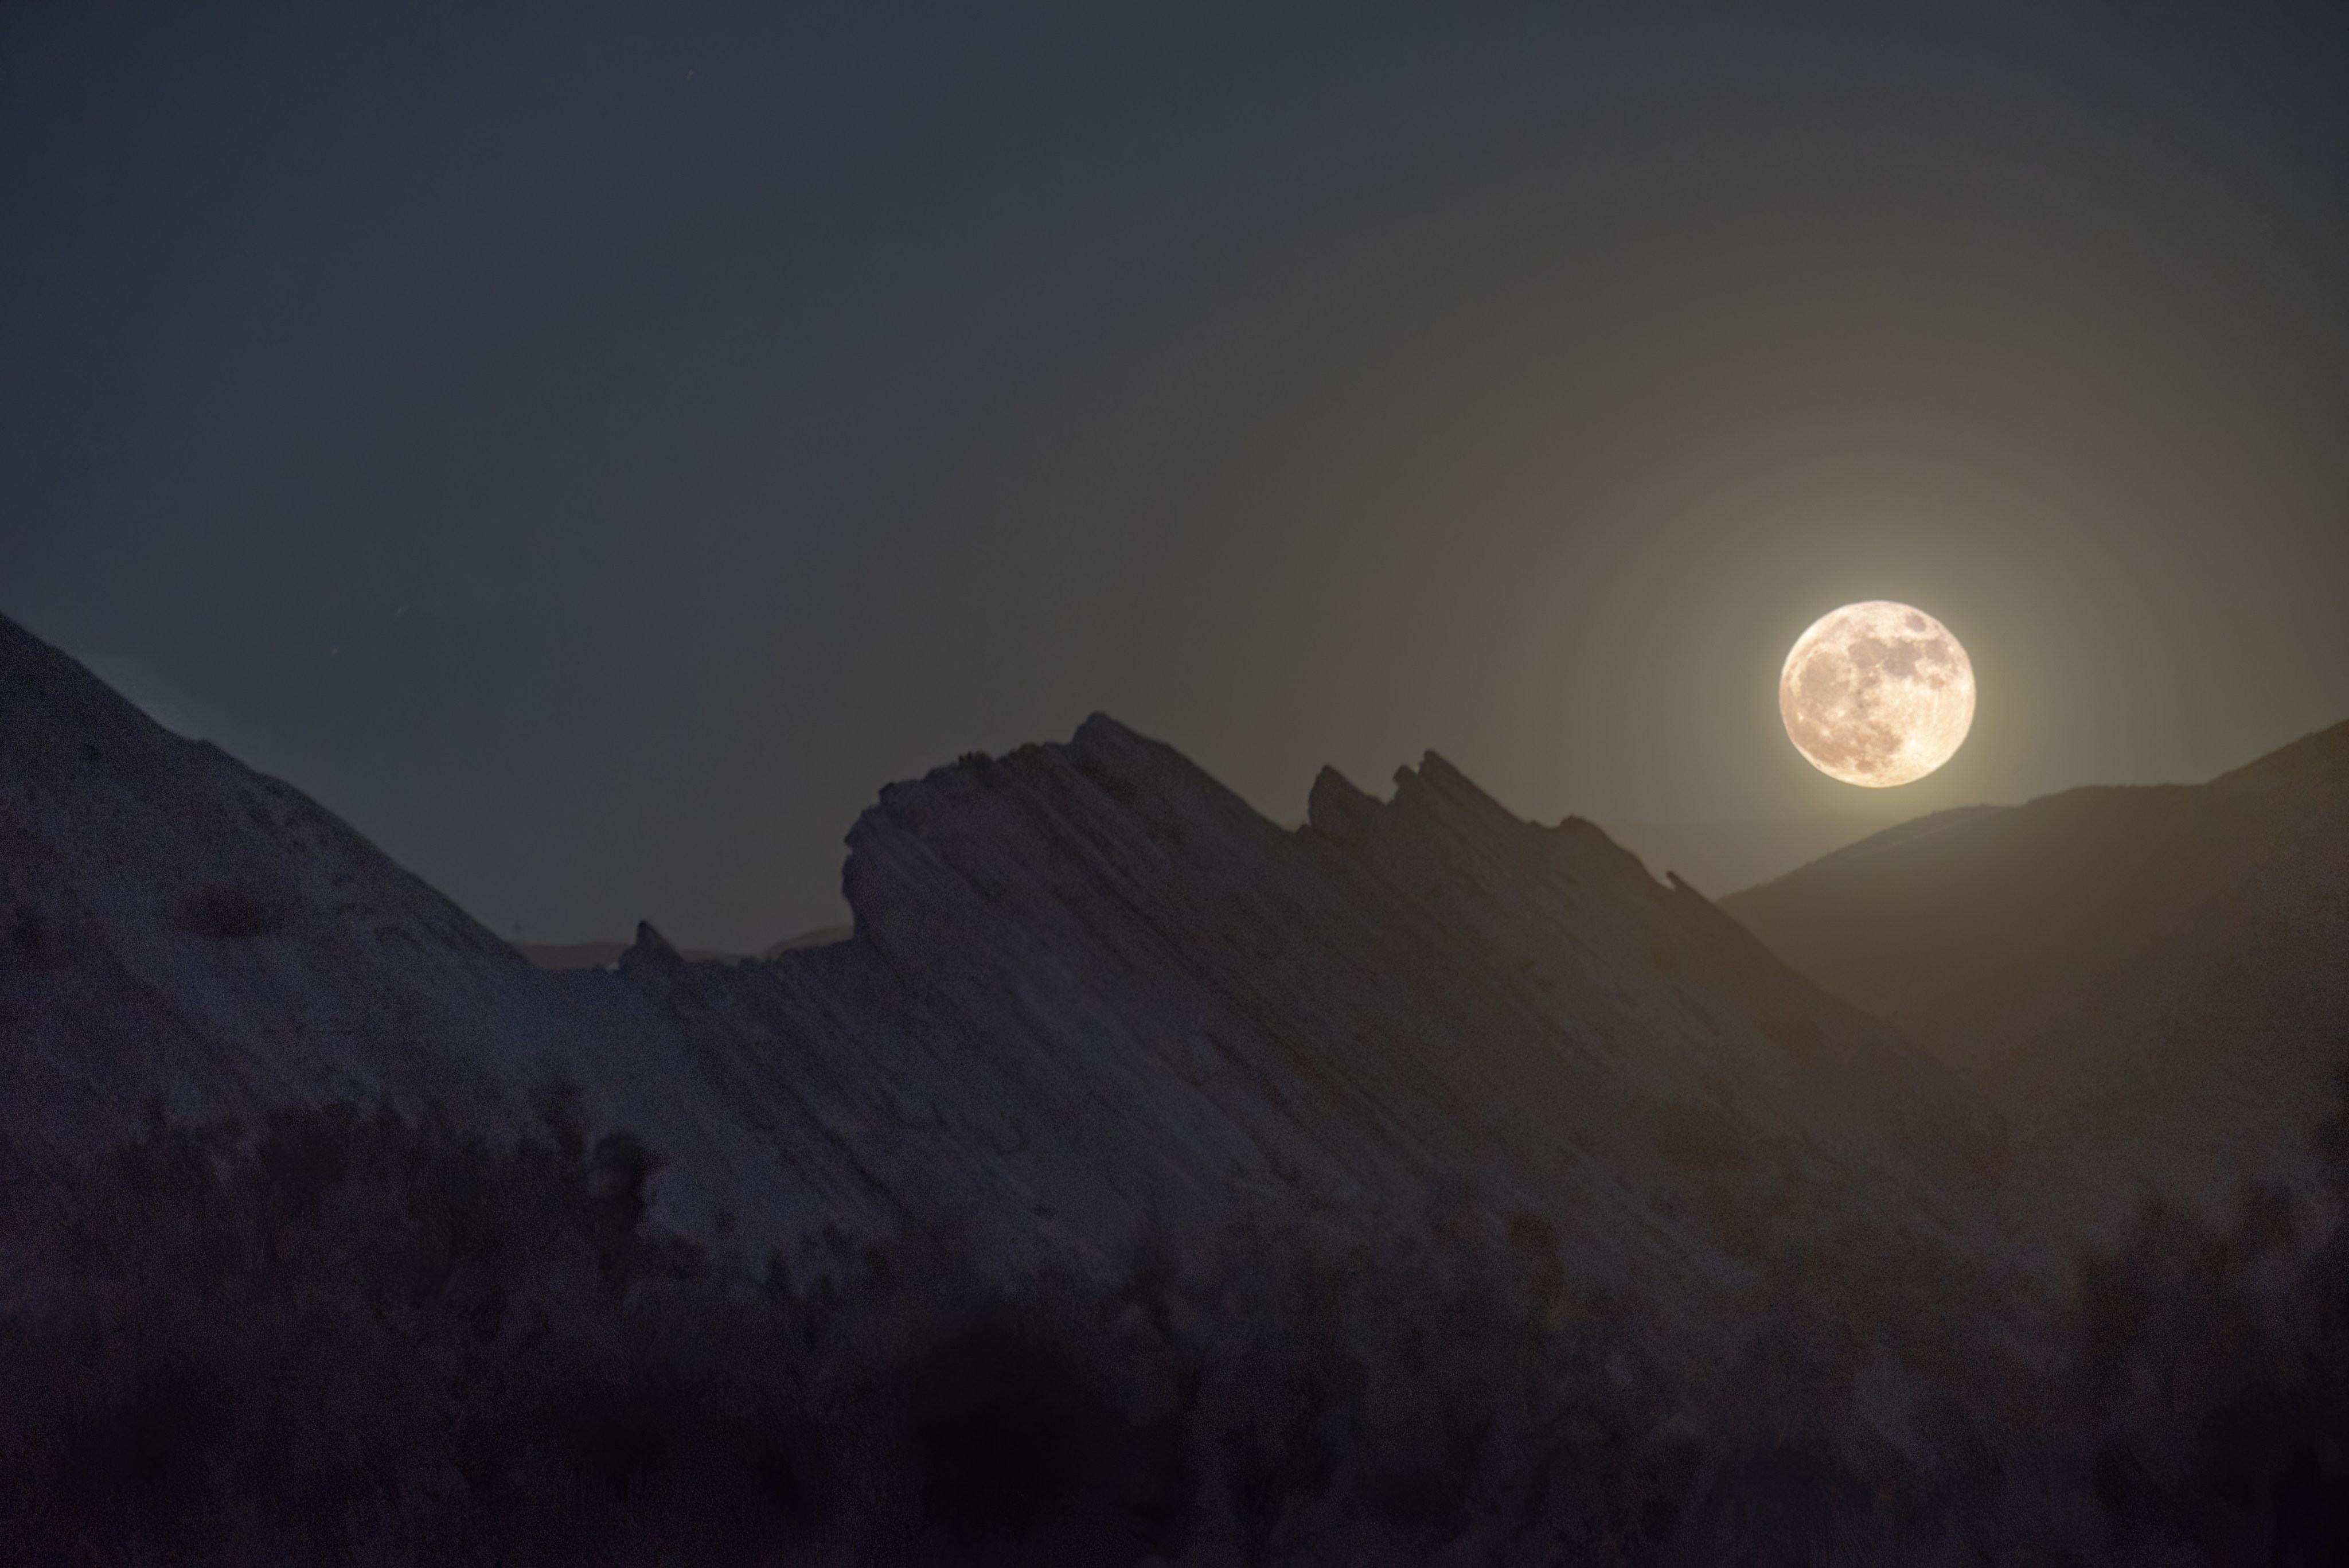 The Next Full Moon is the Cold, Frost or Winter Moon